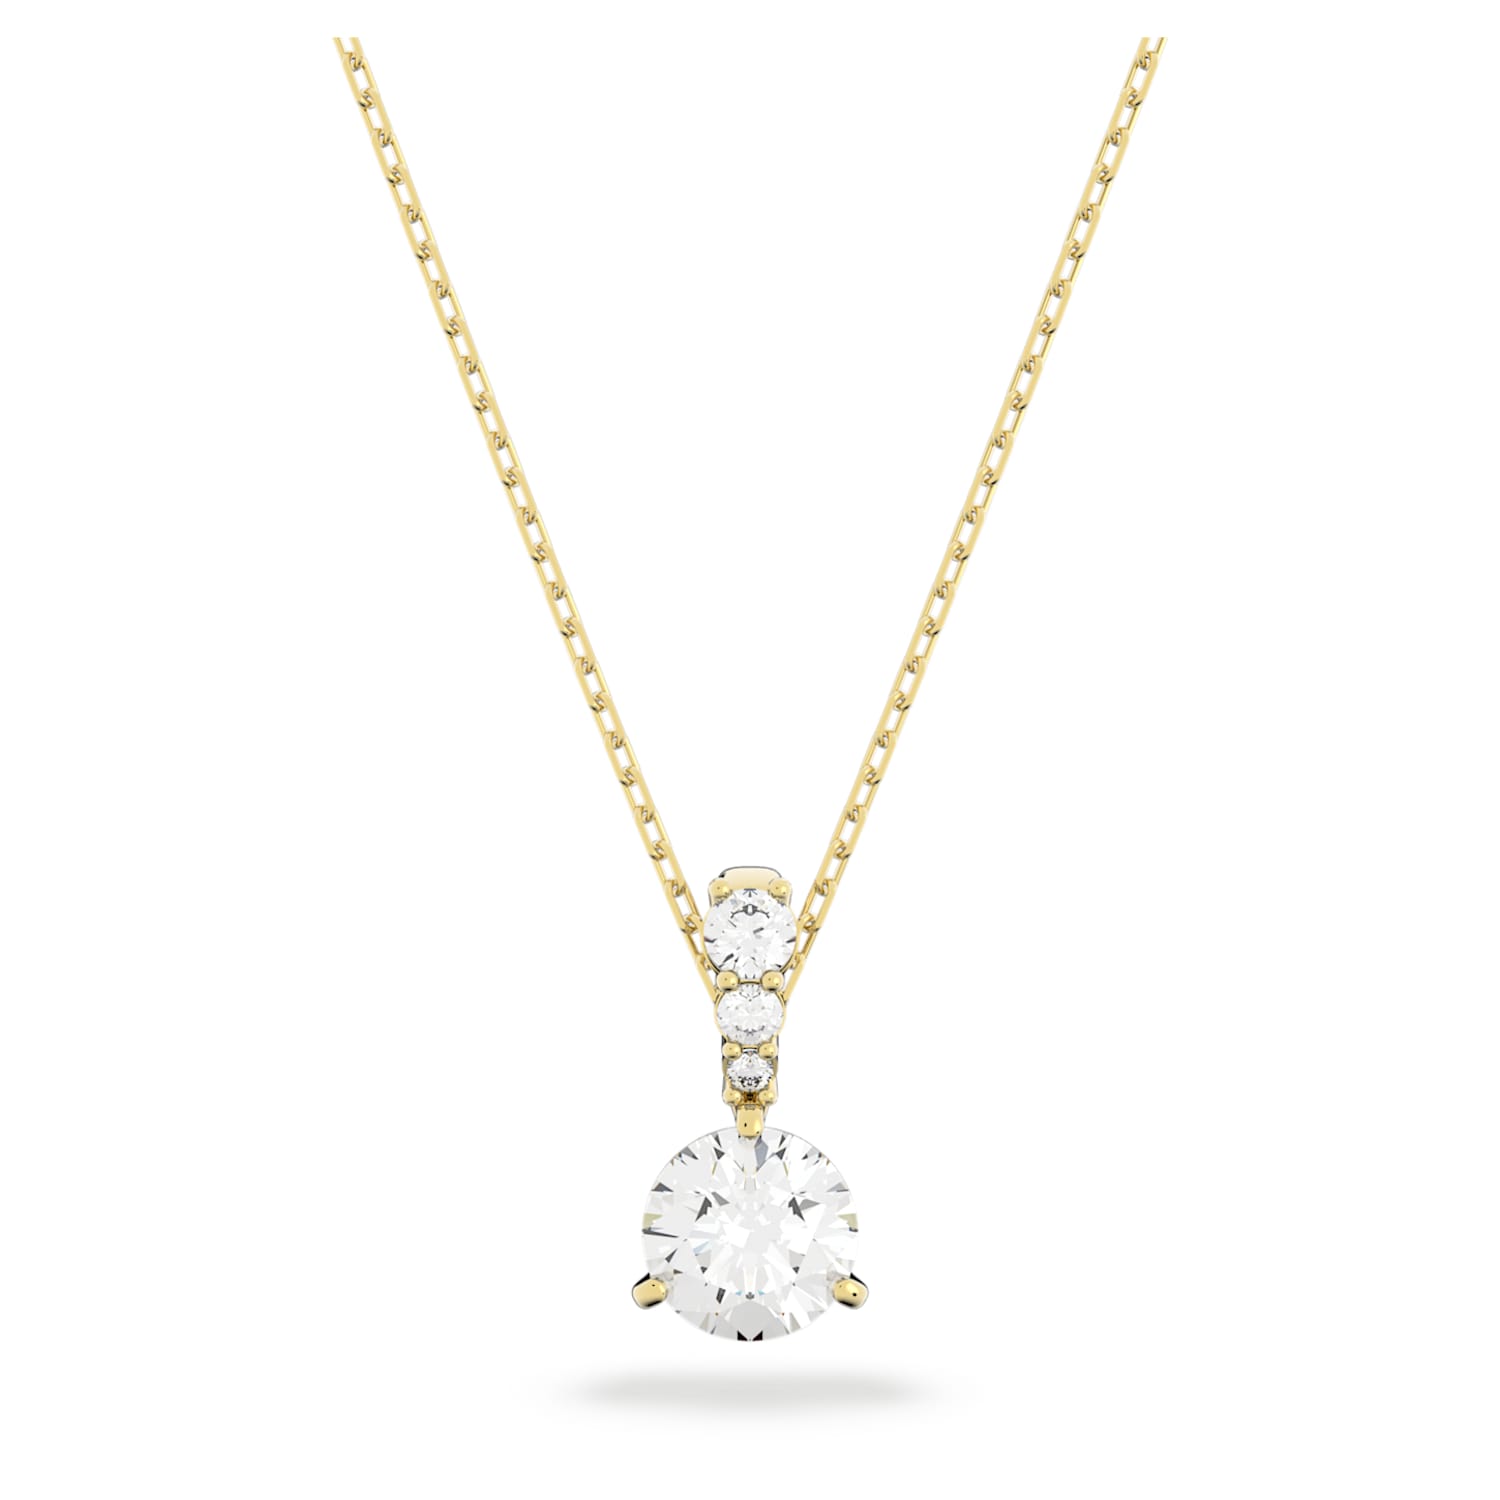 3.50 CT Solitaire Round Cut Simulated Diamond Prong Set White Gold Finish Pendant NecklaceMinimalist NecklaceMothers Day GiftProm Gift